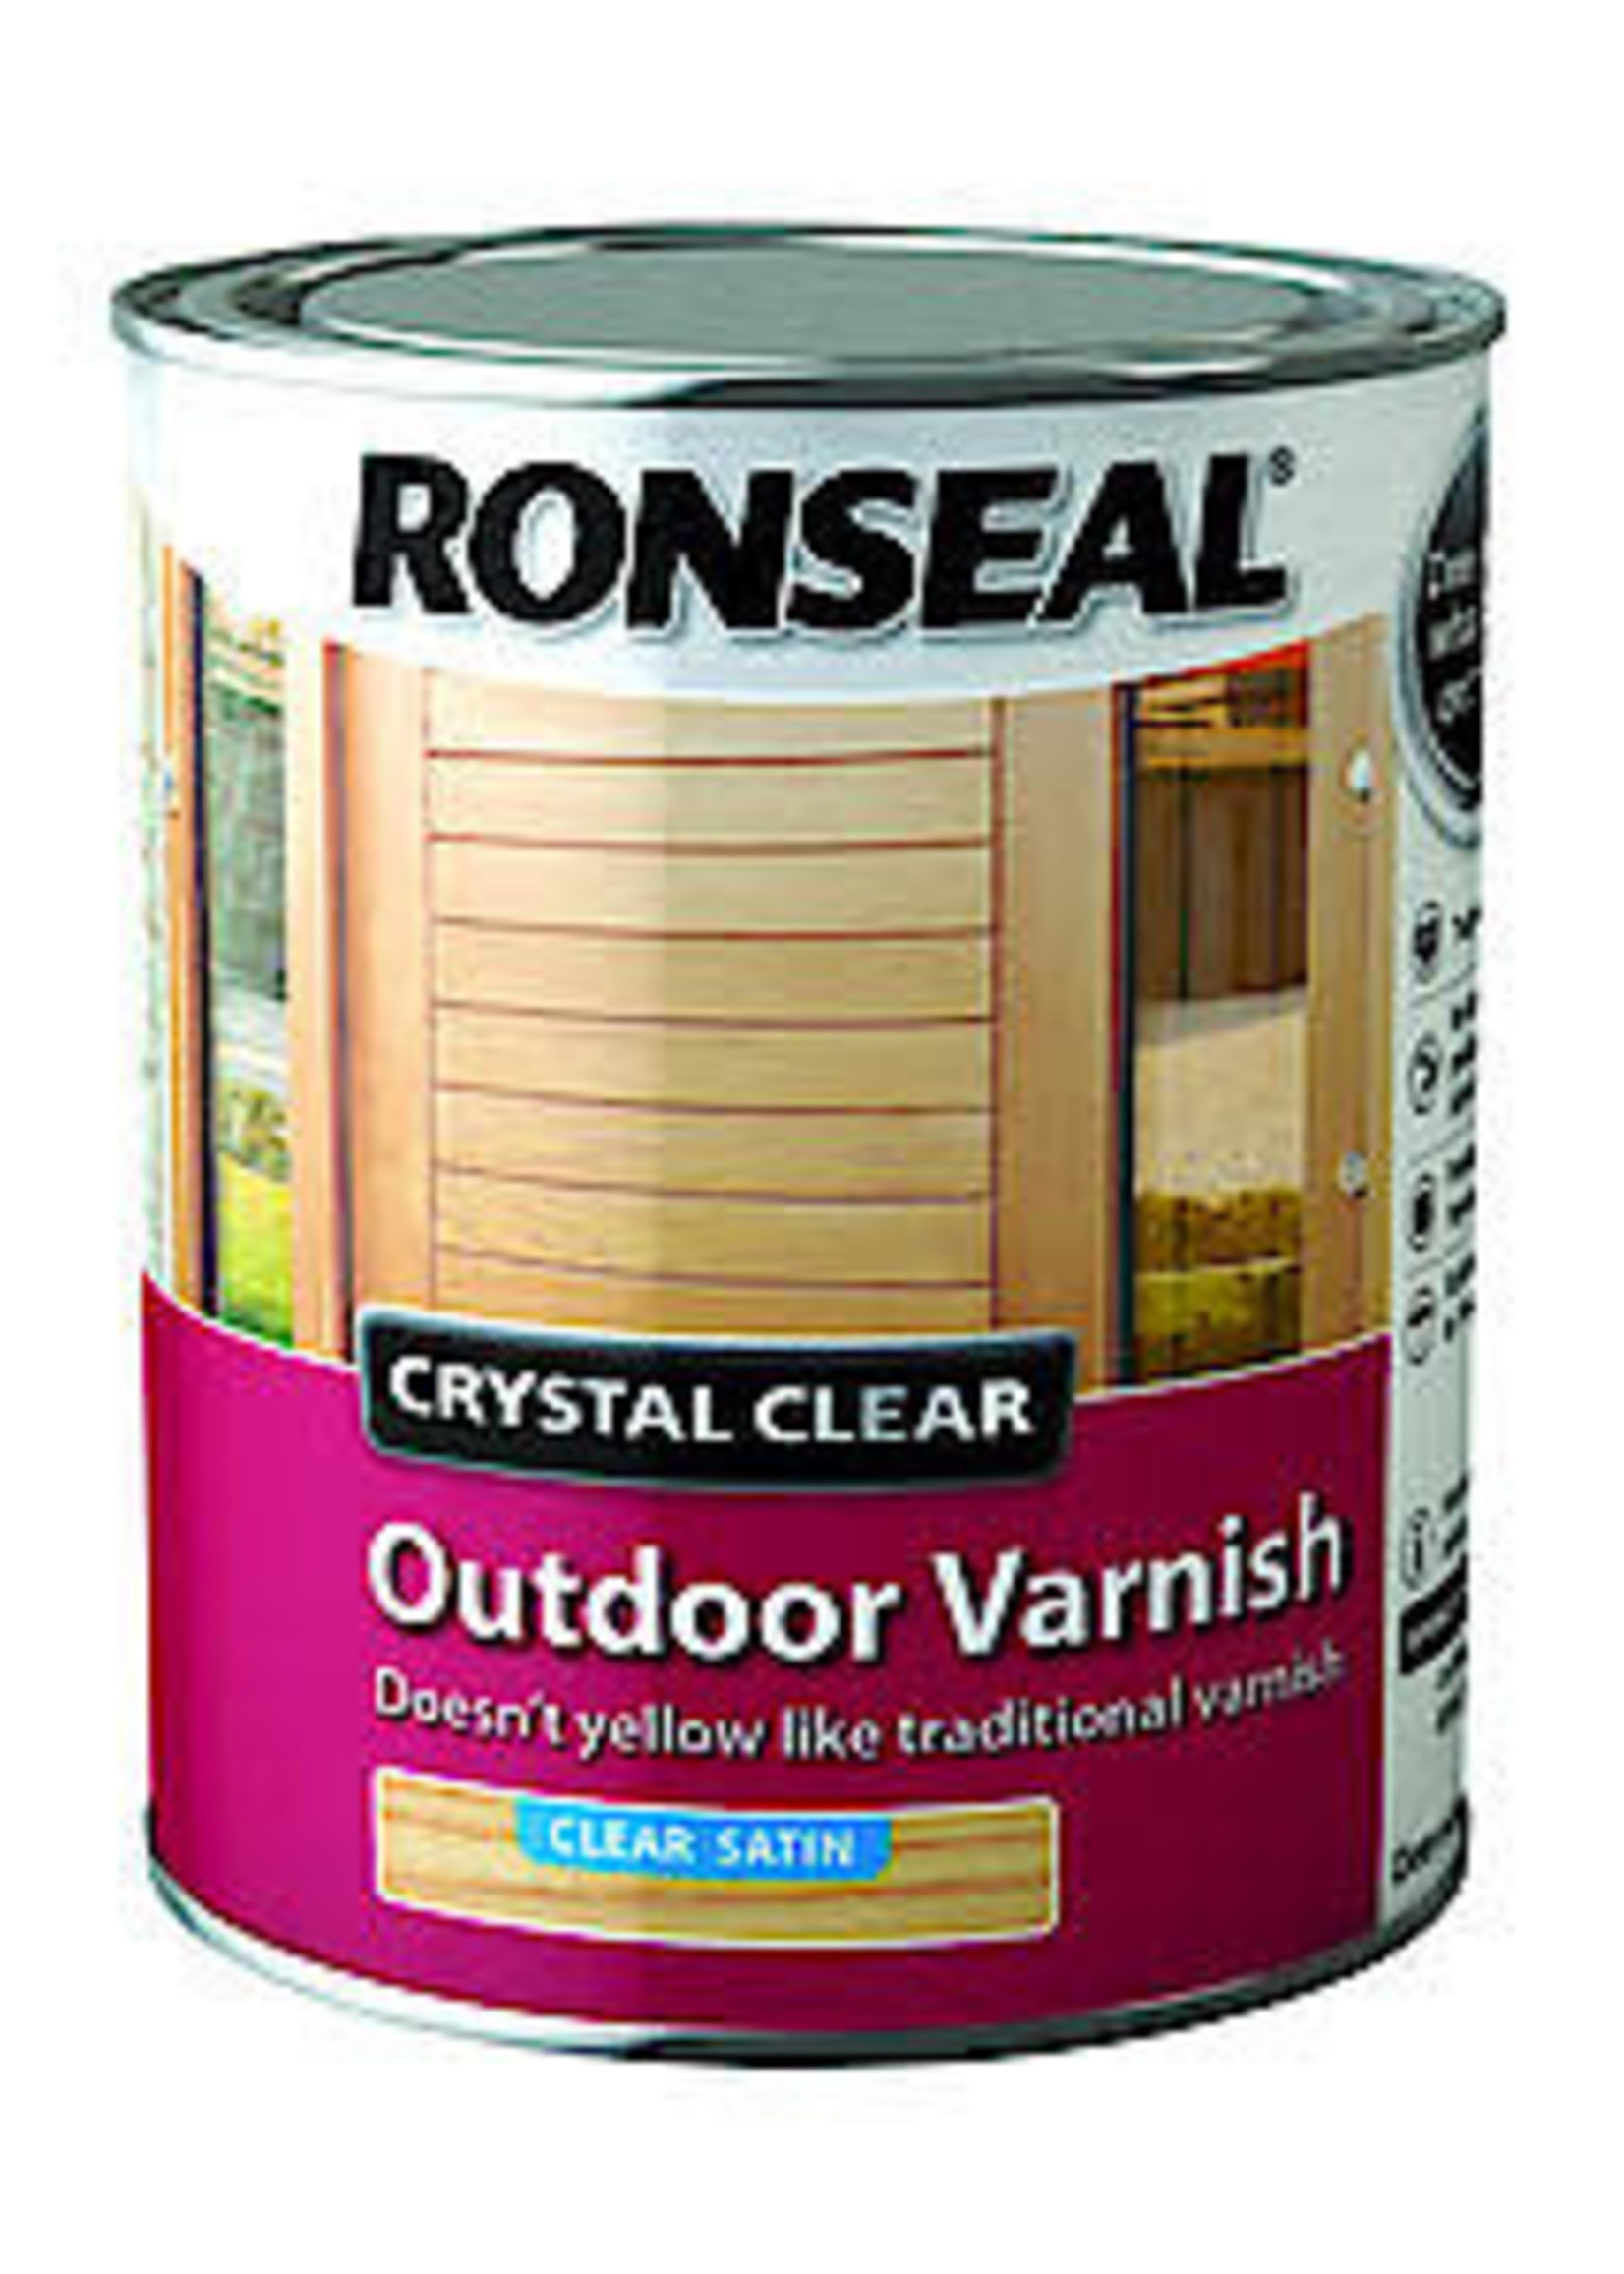 Ronseal Ronseal Crystal Clear Outdoor Varnish Satin 750ml